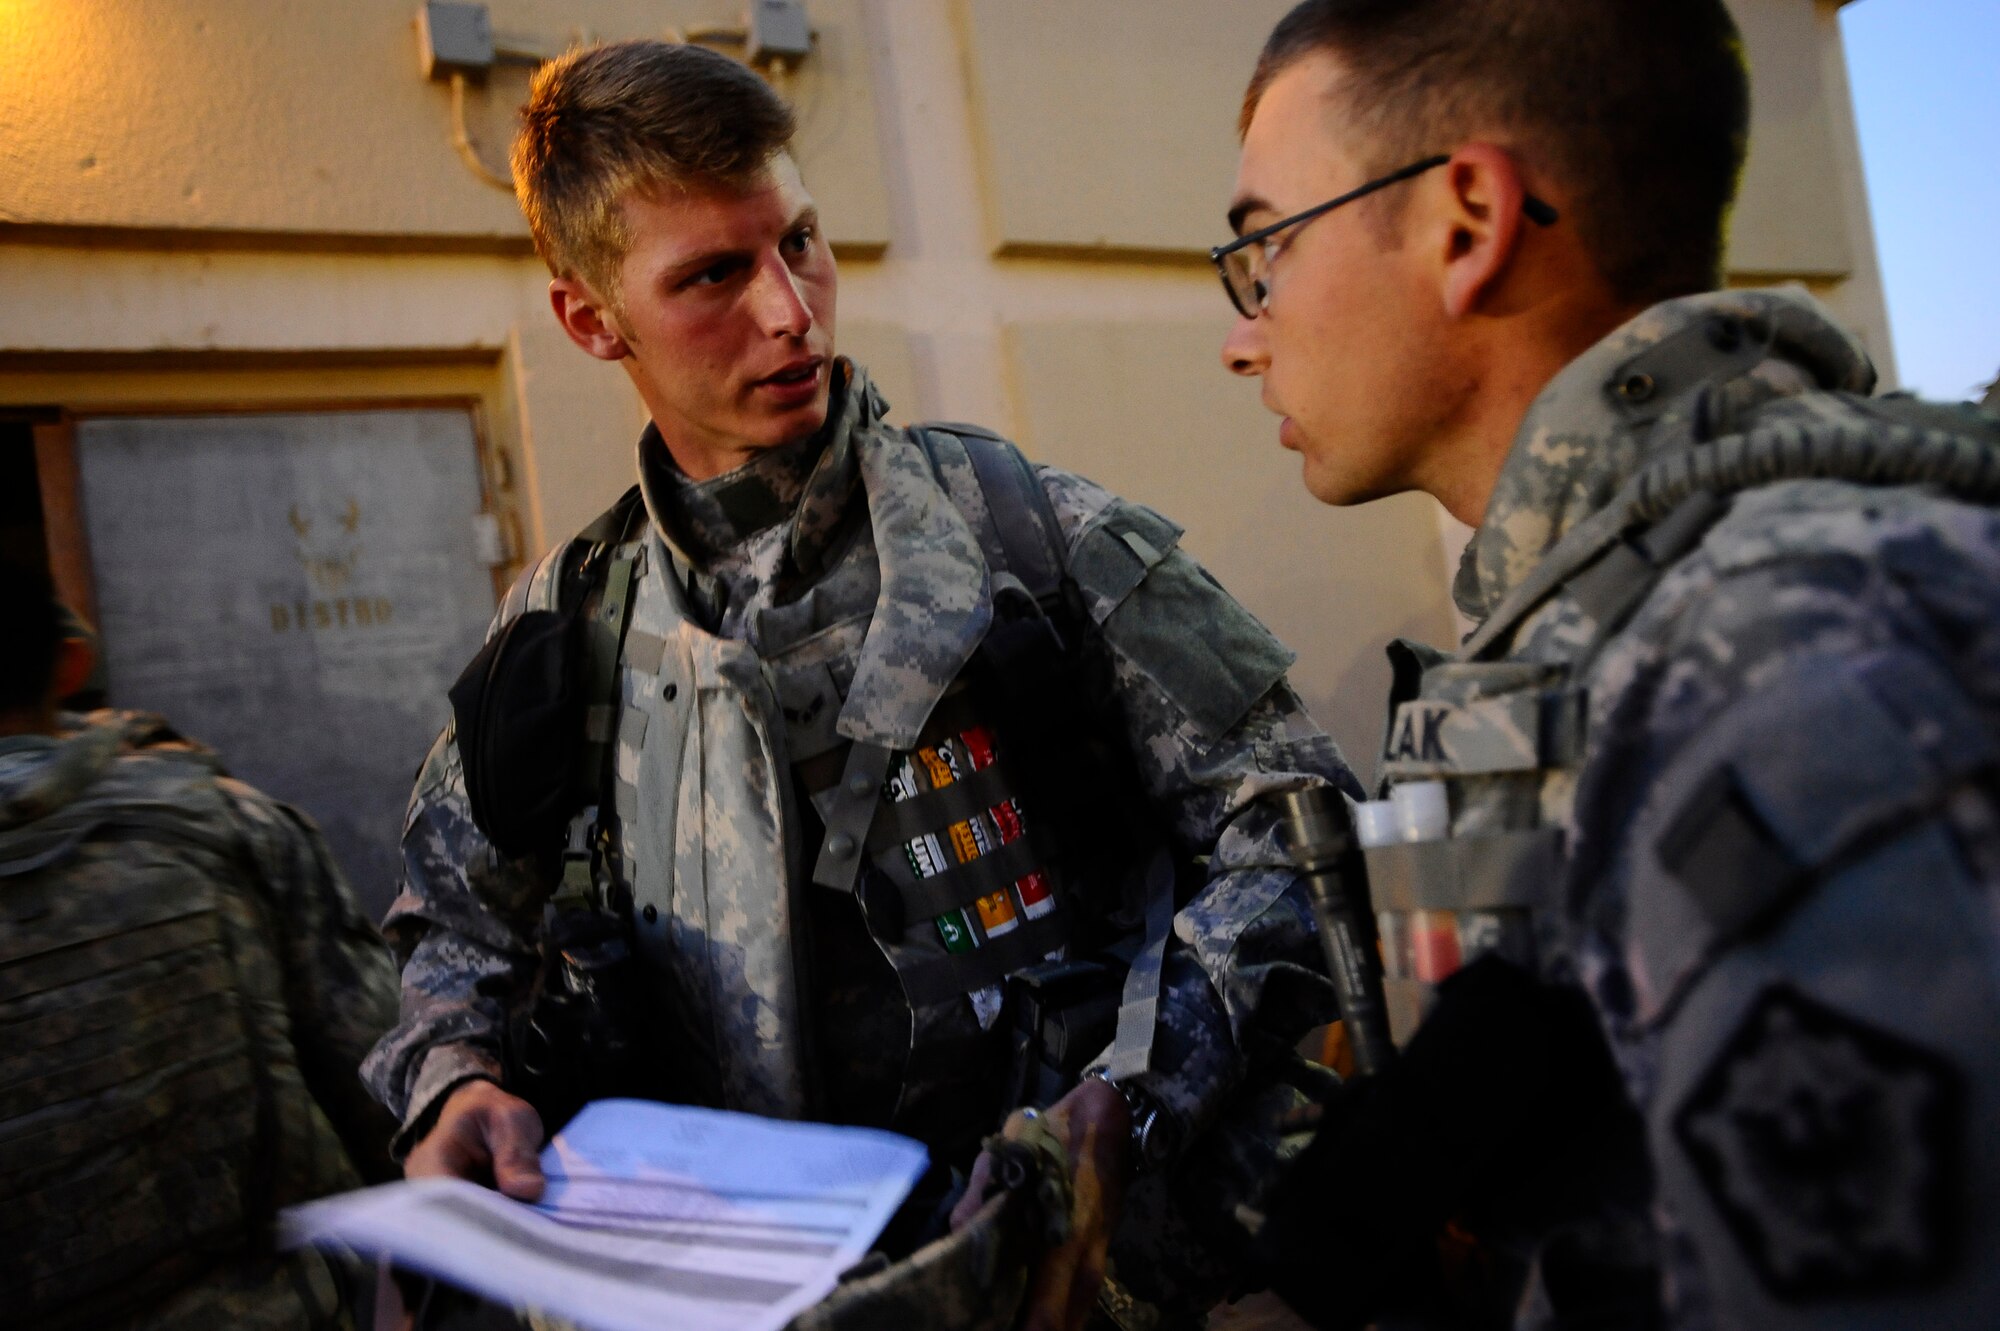 Airmen 1st Class Tim Wynne and Kenneth Bulak discuss a briefing at Joint Base Balad, Iraq, prior to an outside-the-wire mission Dec. 11. Wynne and Bulak are assigned to the 732nd Expeditionary Civil Engineer Squadron Detachment 6, which undertakes construction projects for the Army. Wynne, a structural engineer and native of York, Pa., is deployed from Yokota Air Base, Japan. Bulak, a pavements and equipment operator and native of Warren, Mass., is deployed from Hickam Air Force Base, Hawaii. (U.S. Air Force photo/Airman 1st Class Jason Epley)